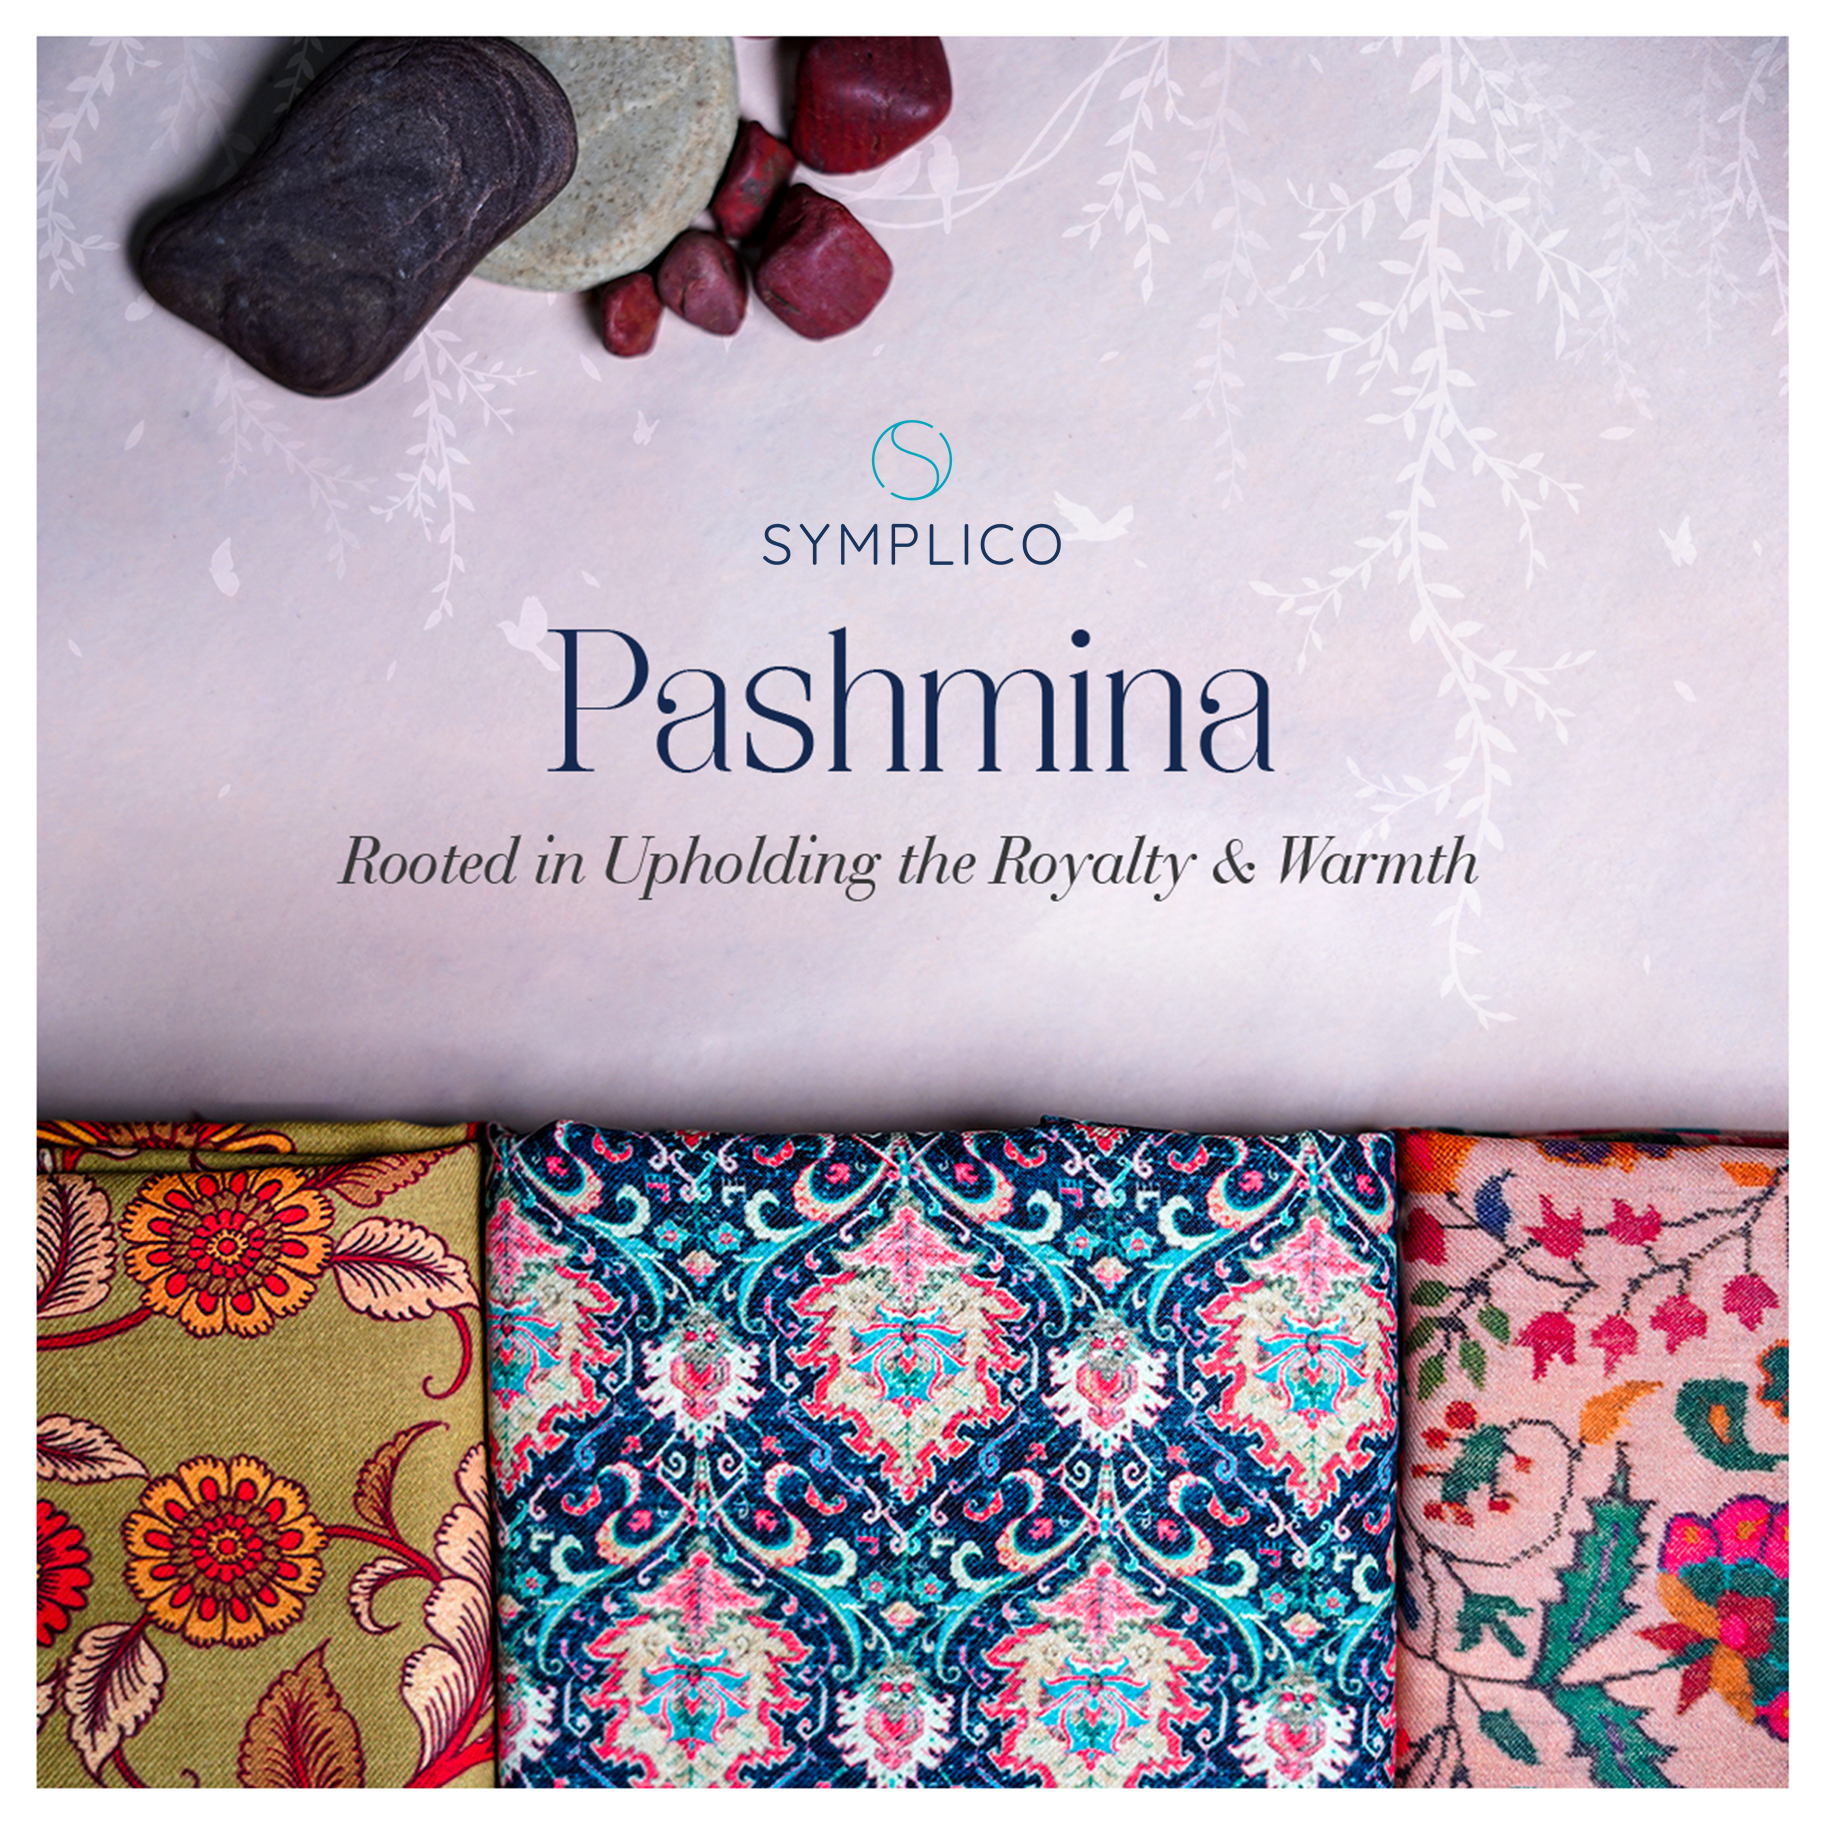 Pashmina: Rooted in Upholding the Royalty & Warmth